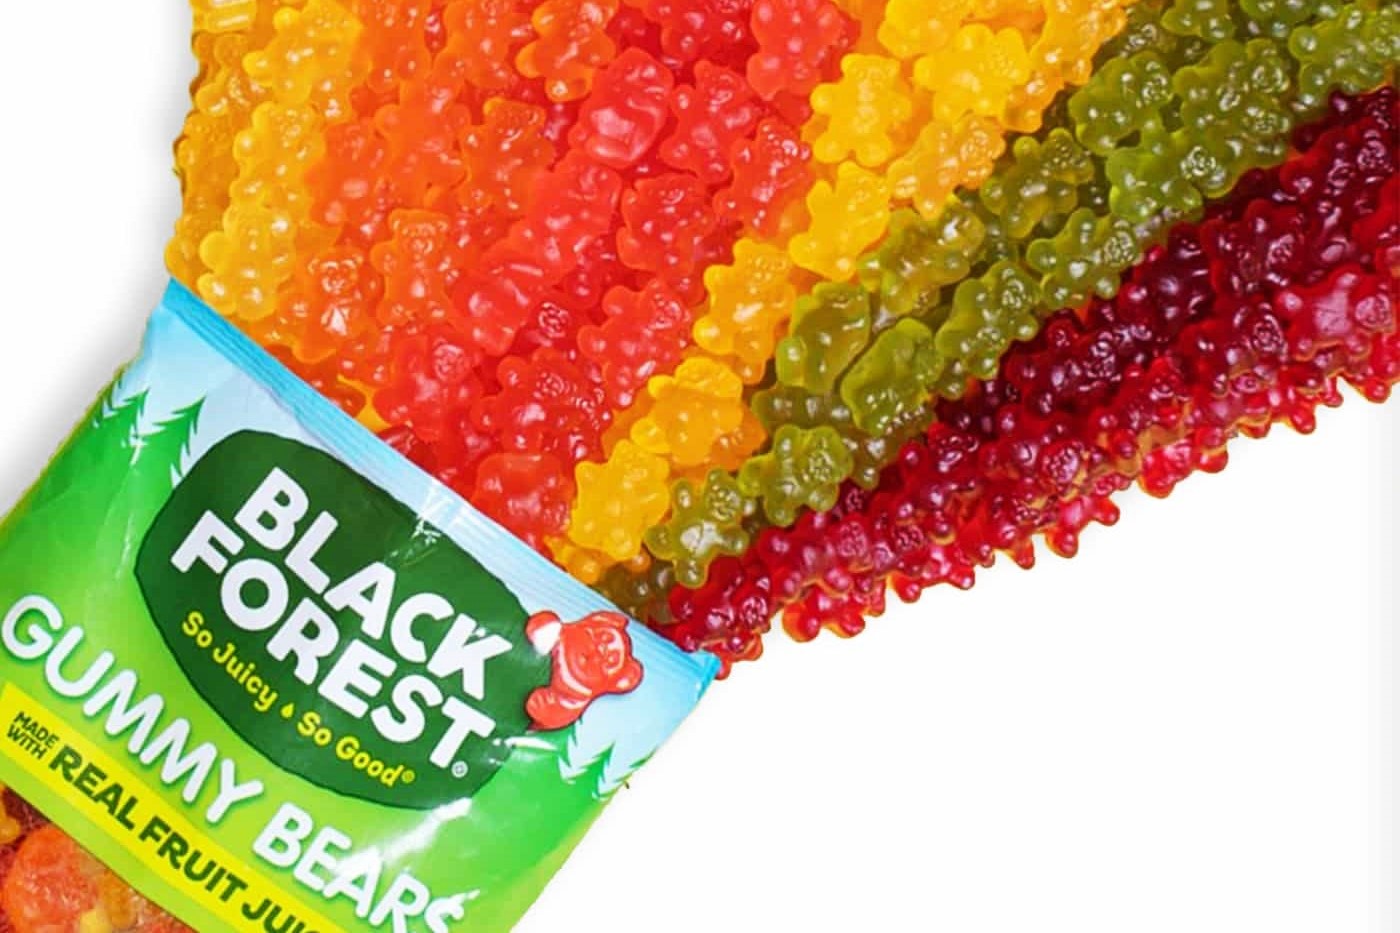 15-black-forest-gummy-bears-nutrition-facts